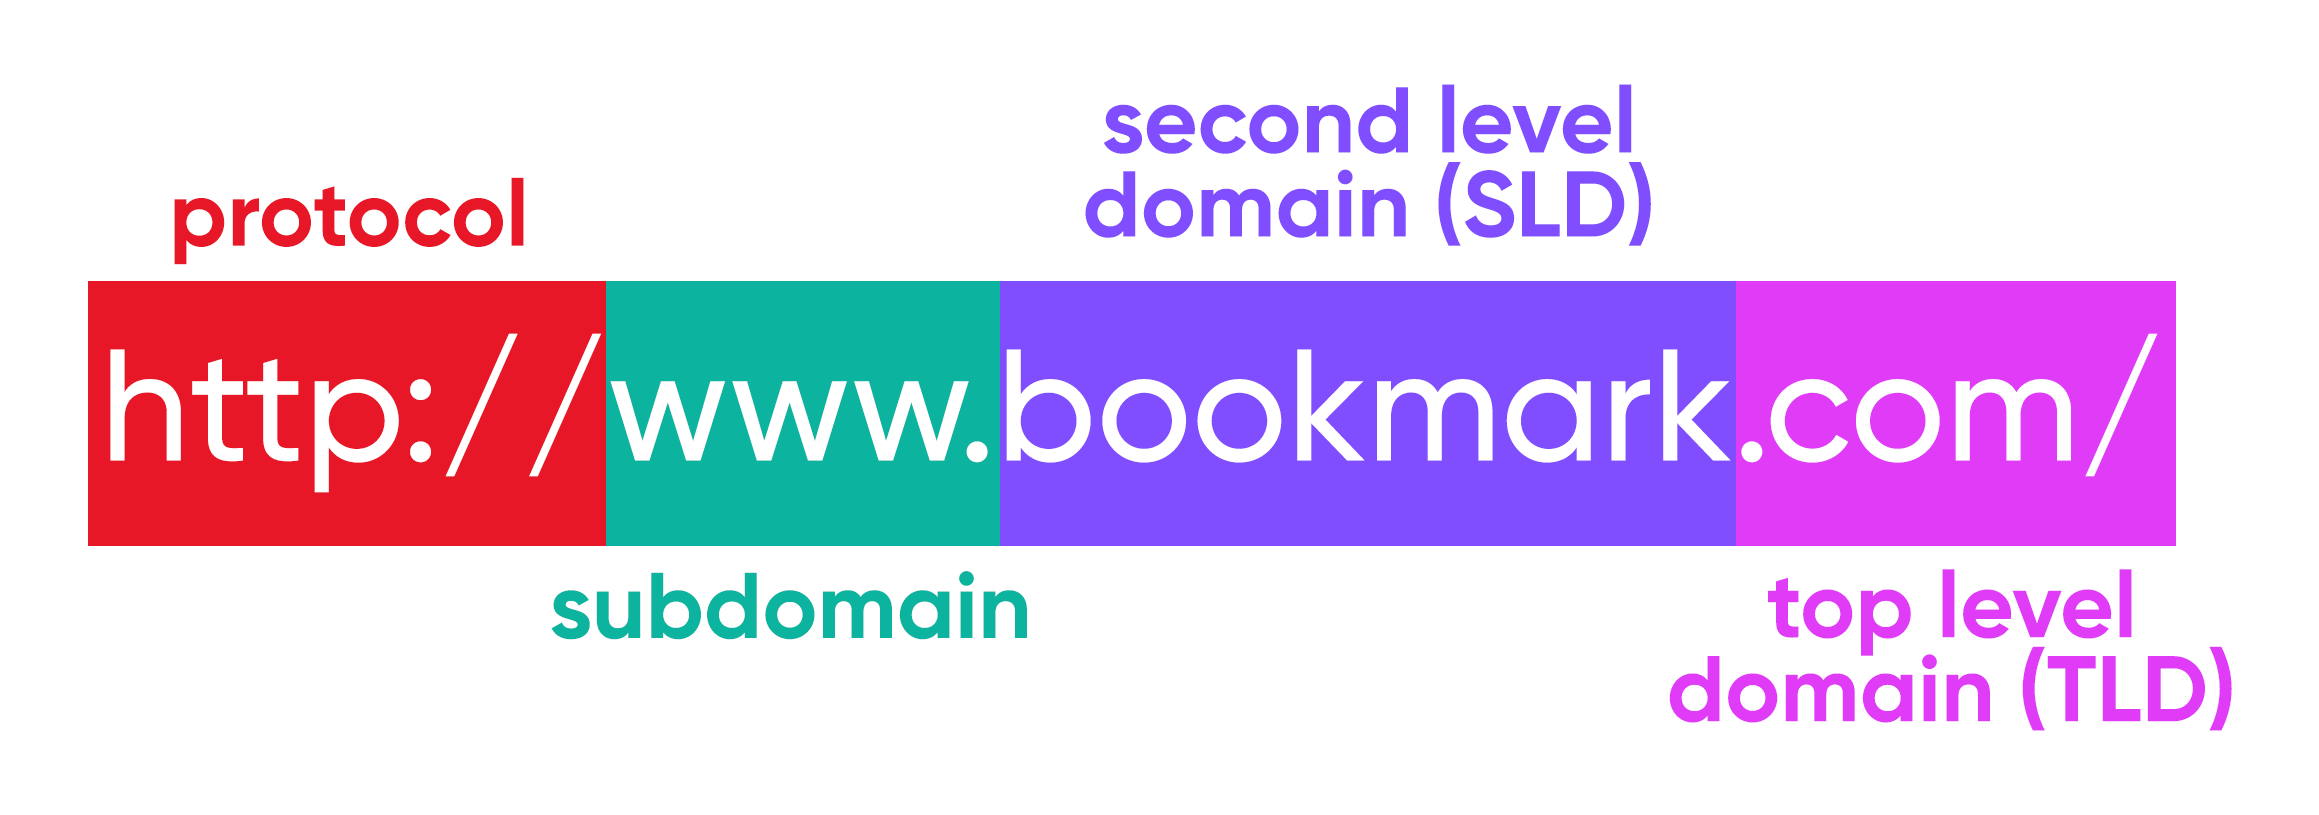 How to Choose the Perfect Domain Name in 2021